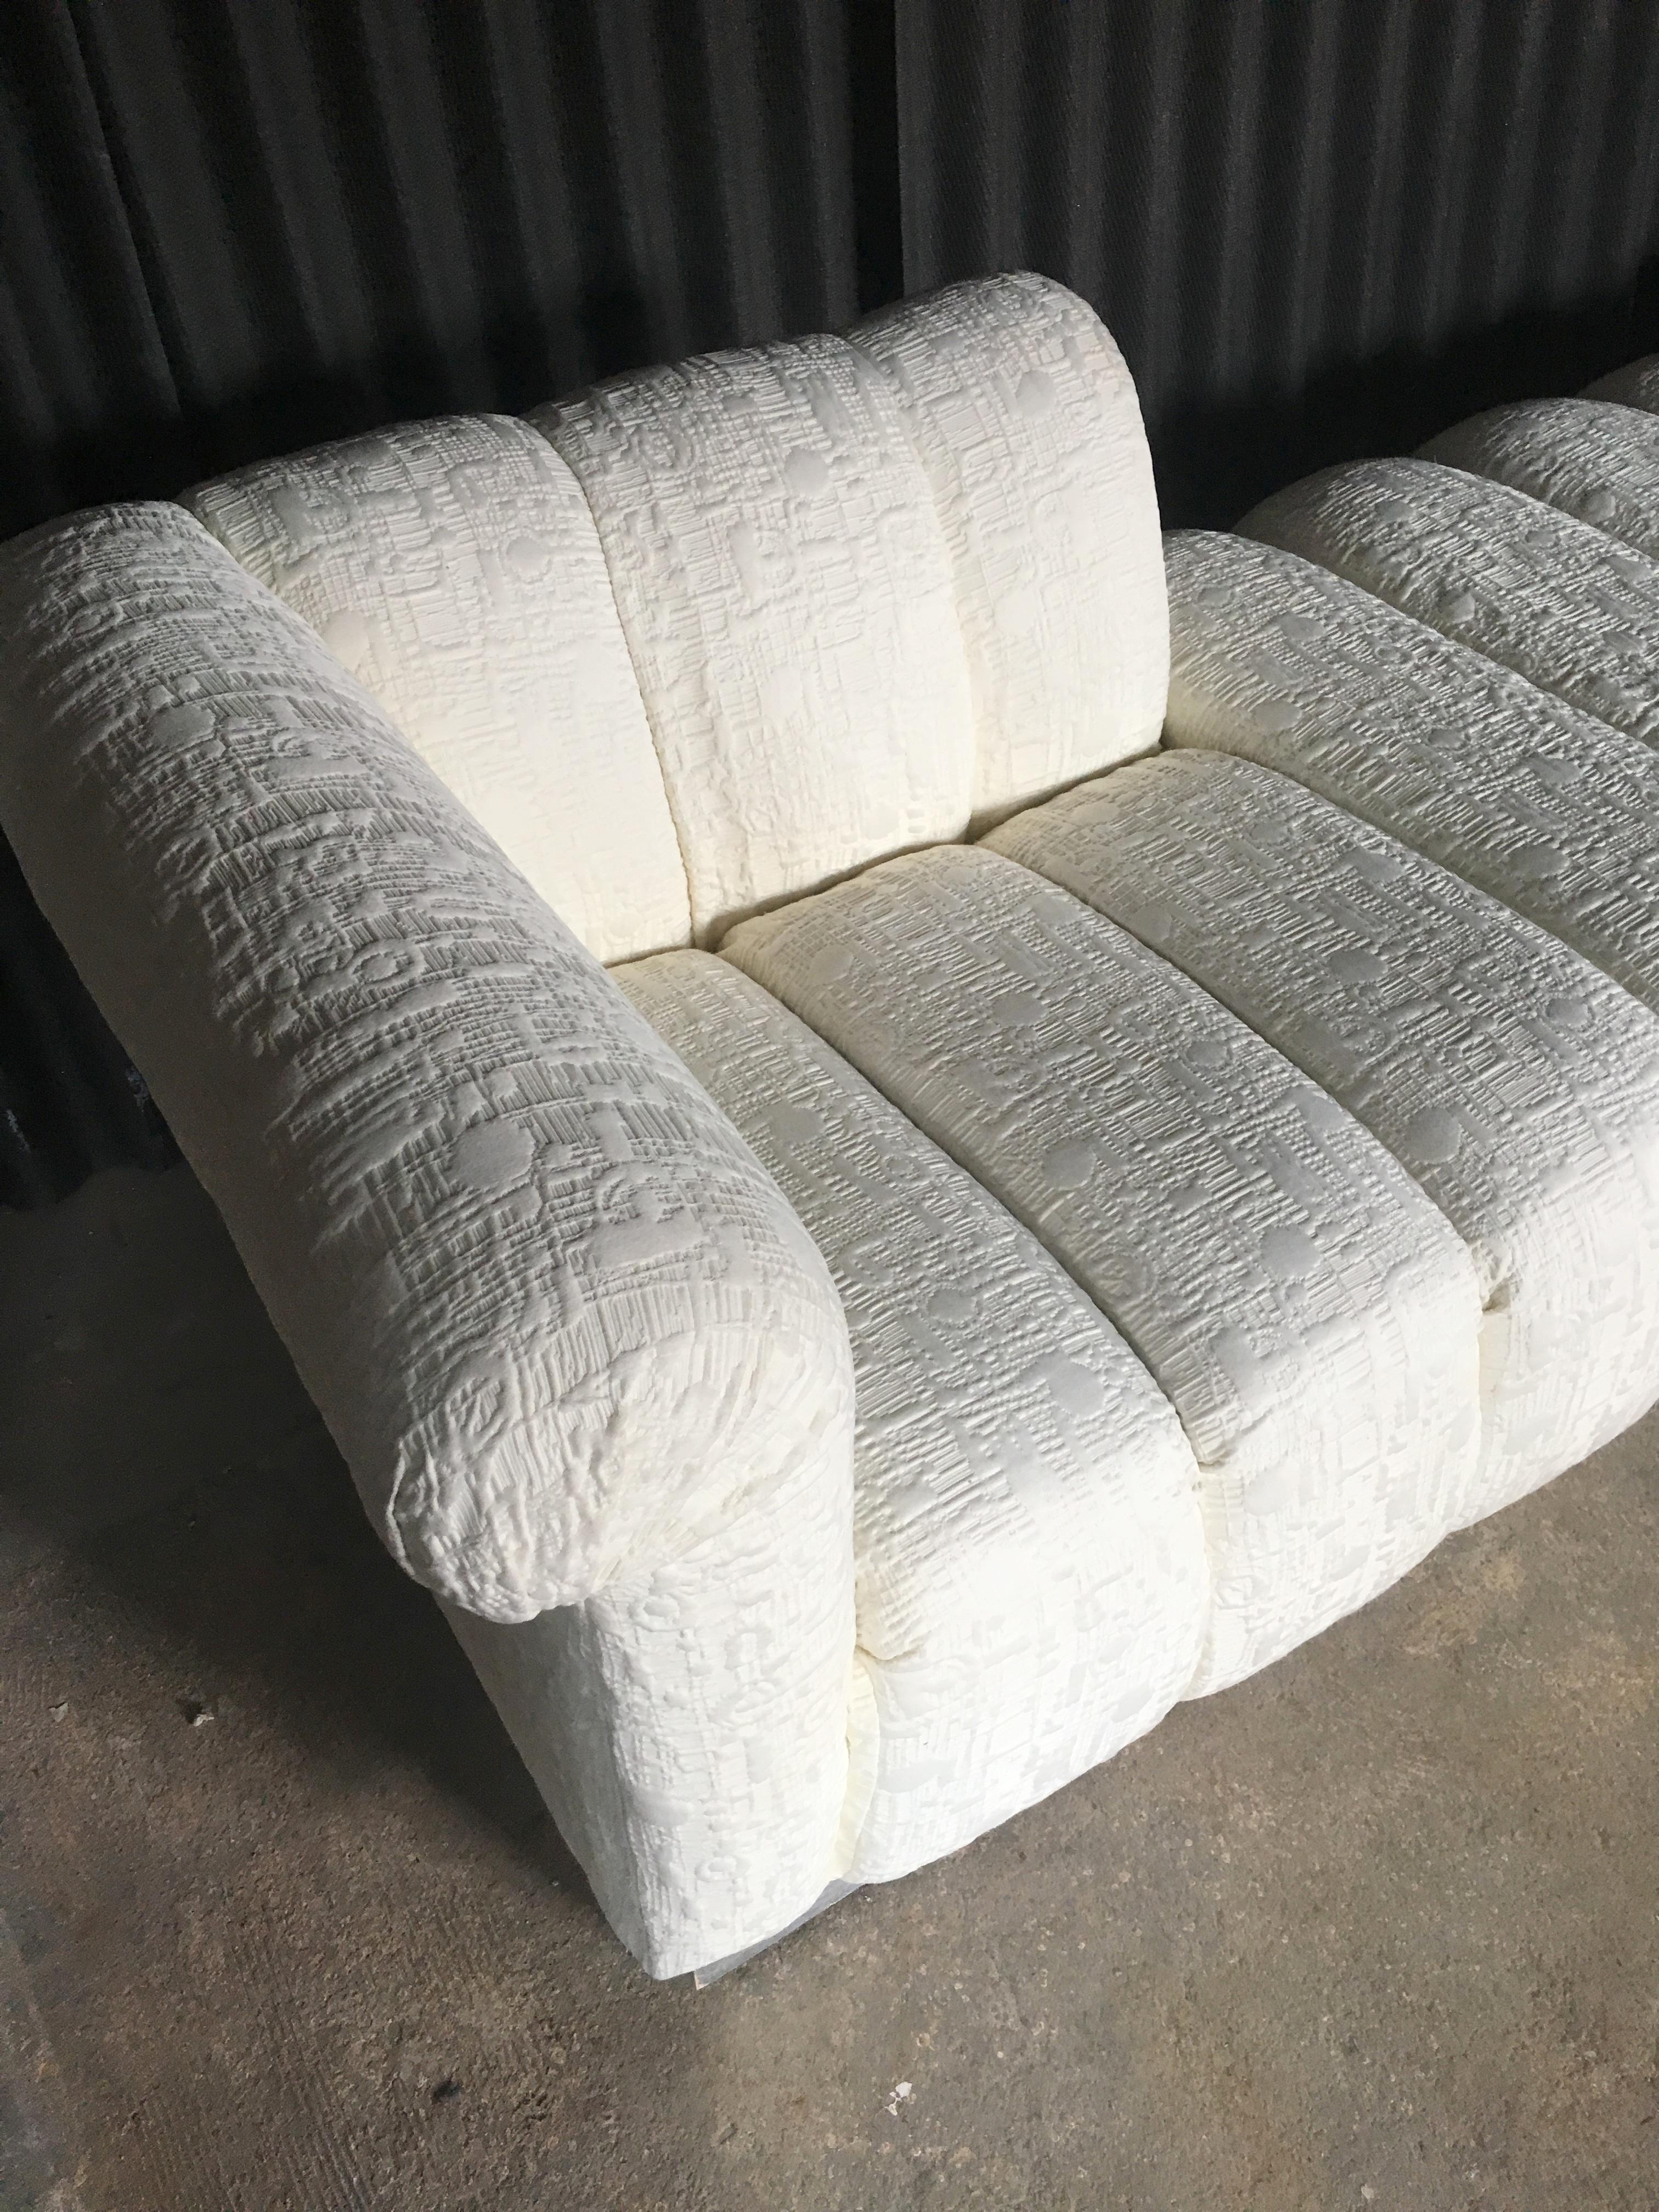 American Fabulous Over-Sized Channel Tufted Chaise or Lounge Fainting Couch